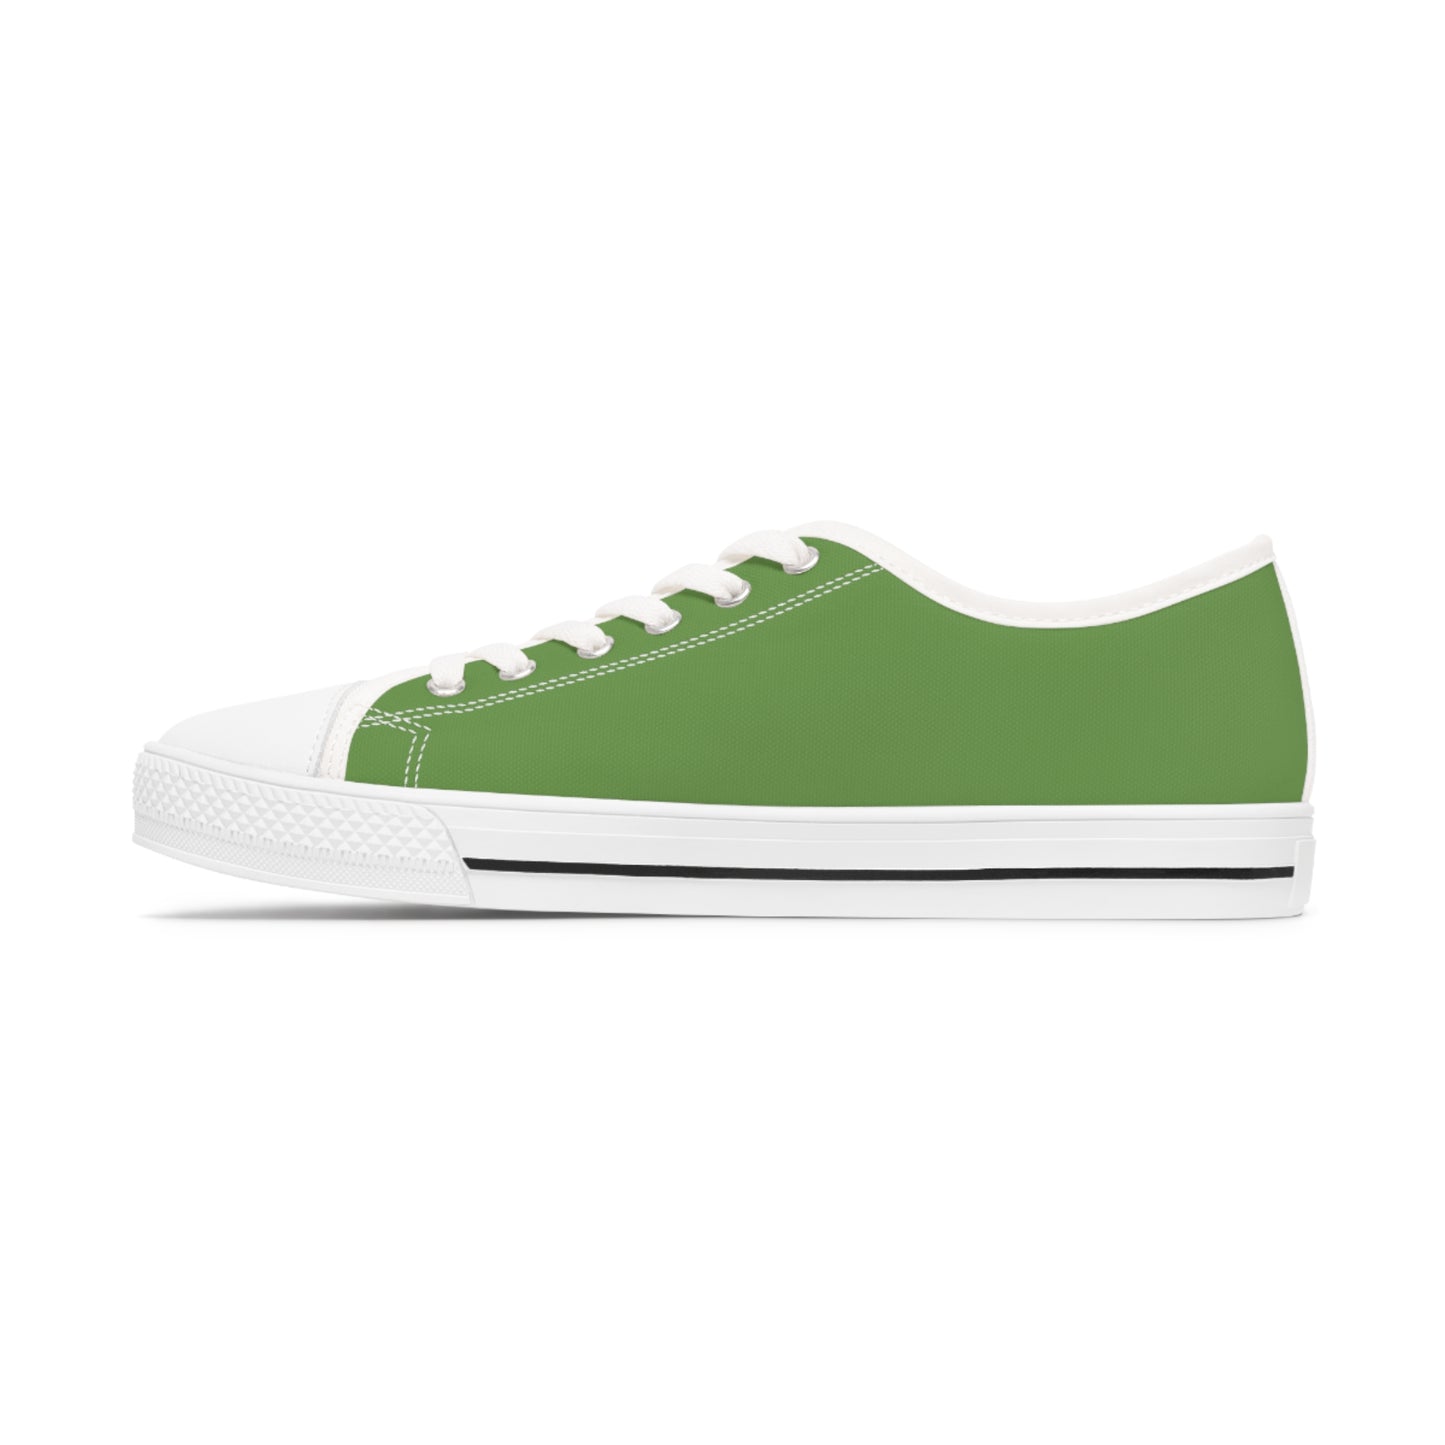 Women's Low Top Sneakers - Dark Olive US 12 White sole